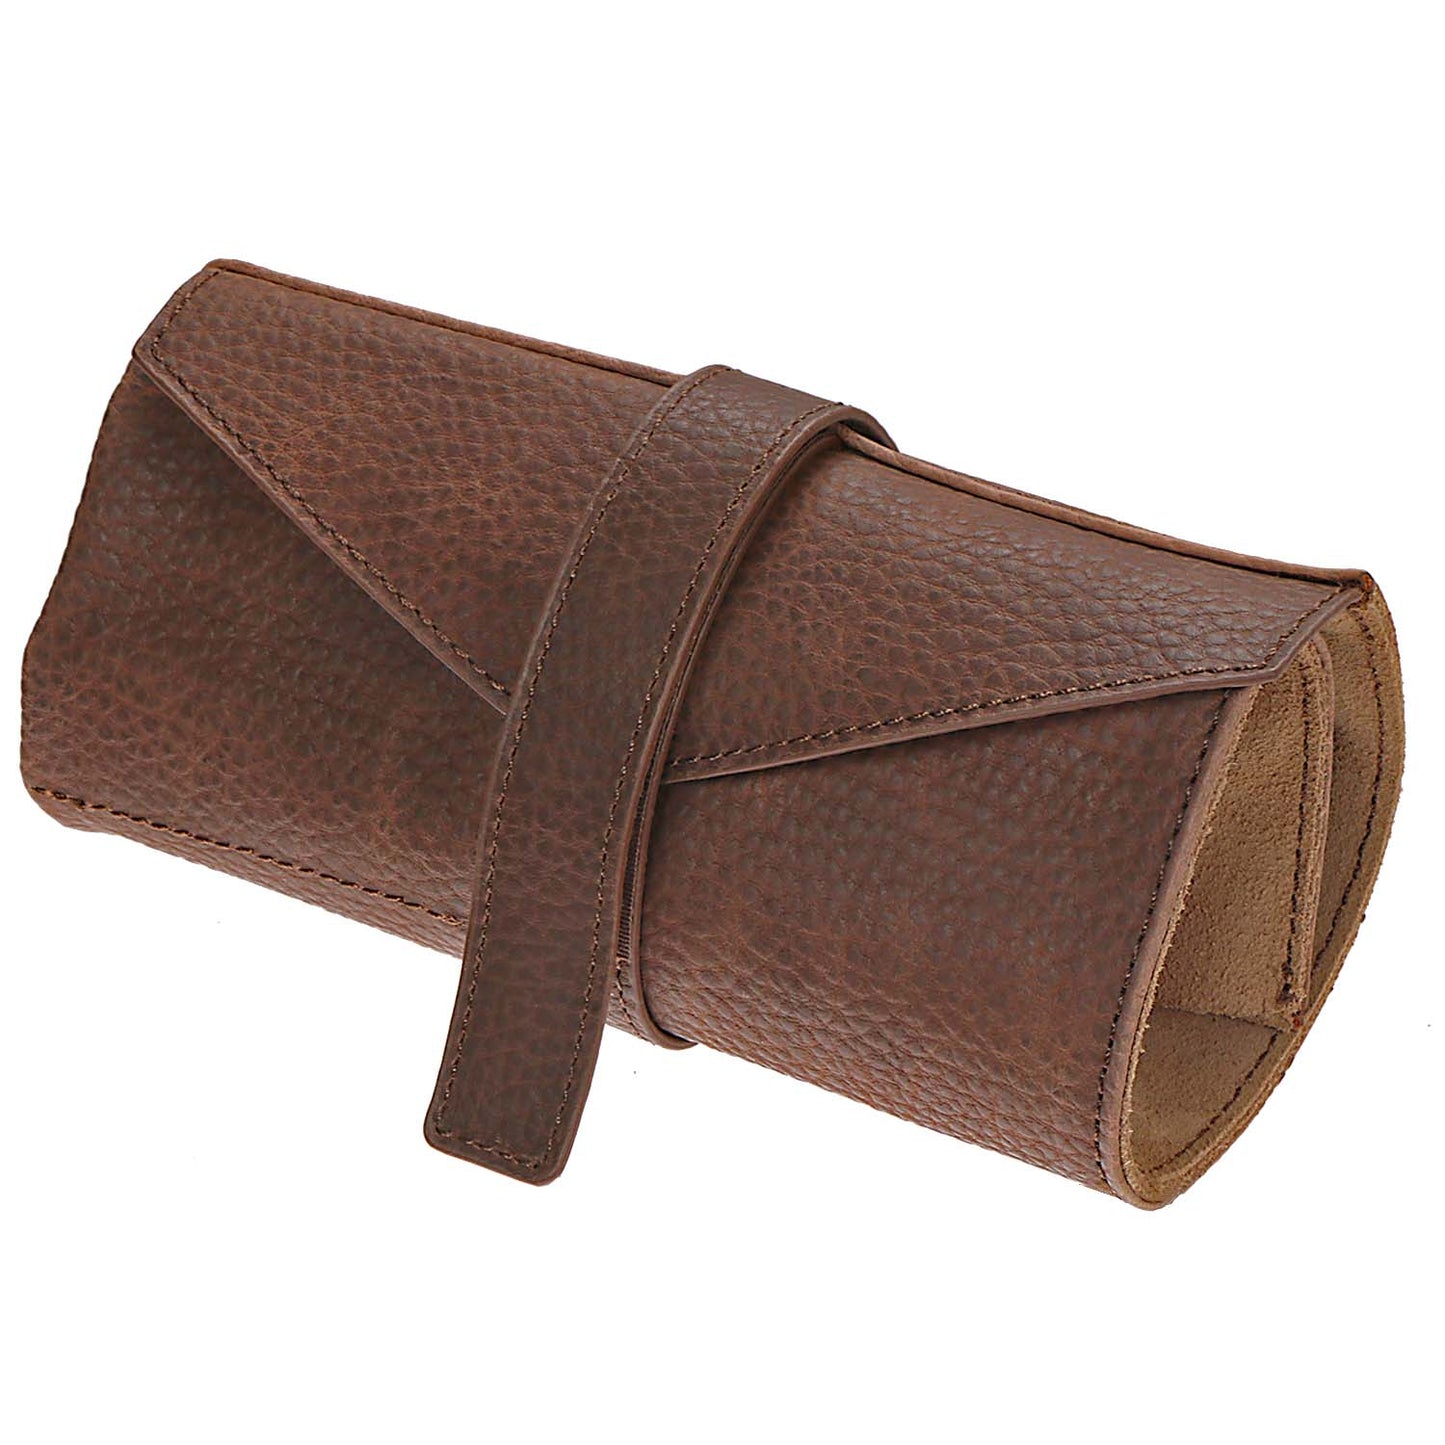 DASSARI Vintage Leather Watch Roll - Out of Stock